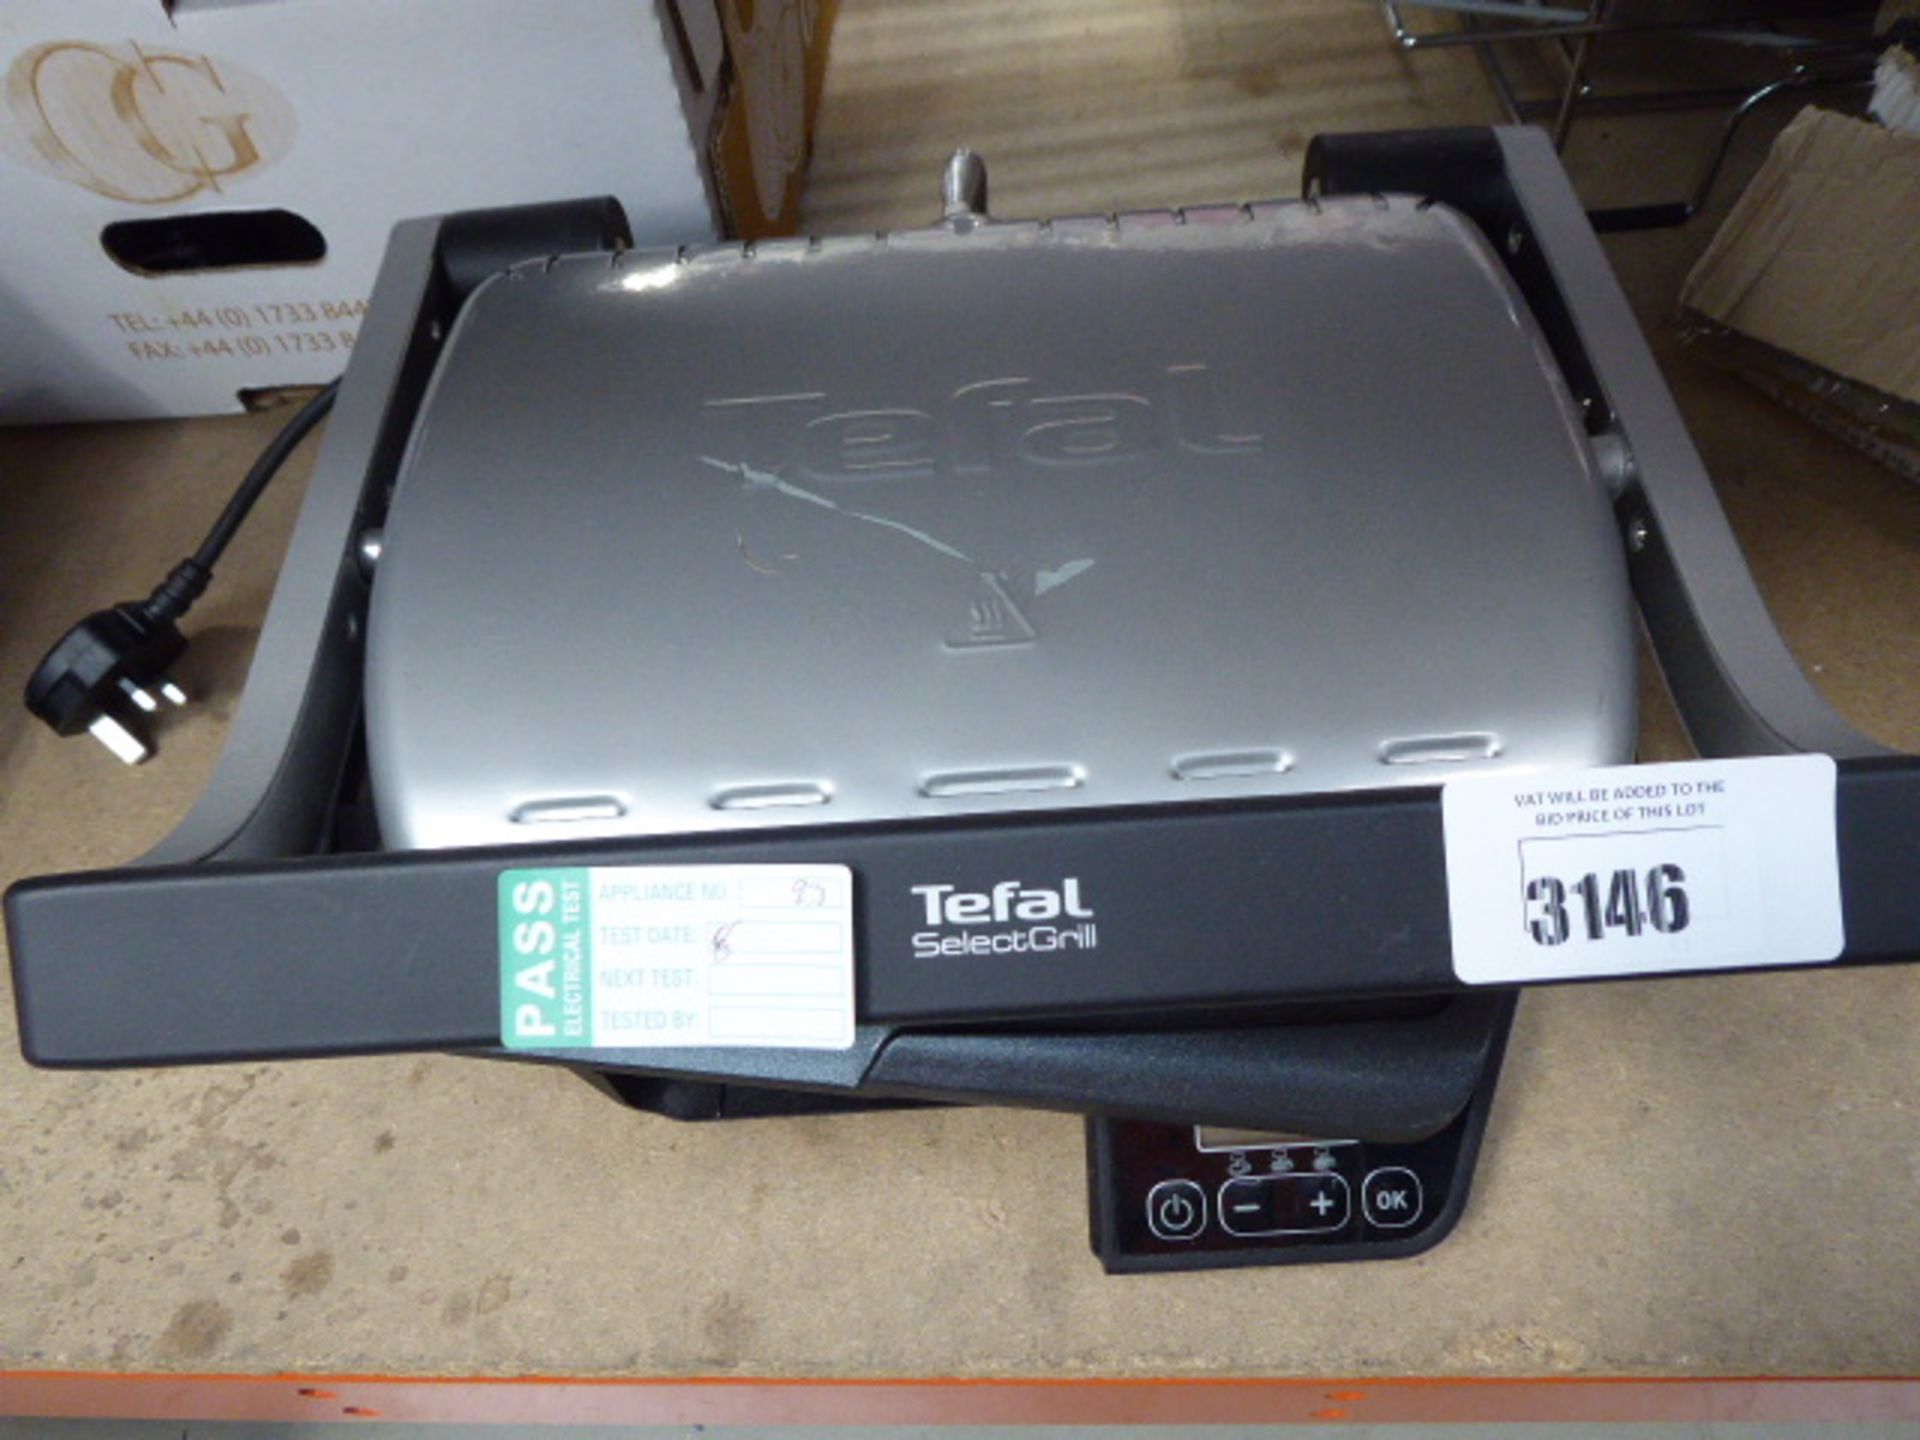 (TN93) Unboxed Tefal Select Grill